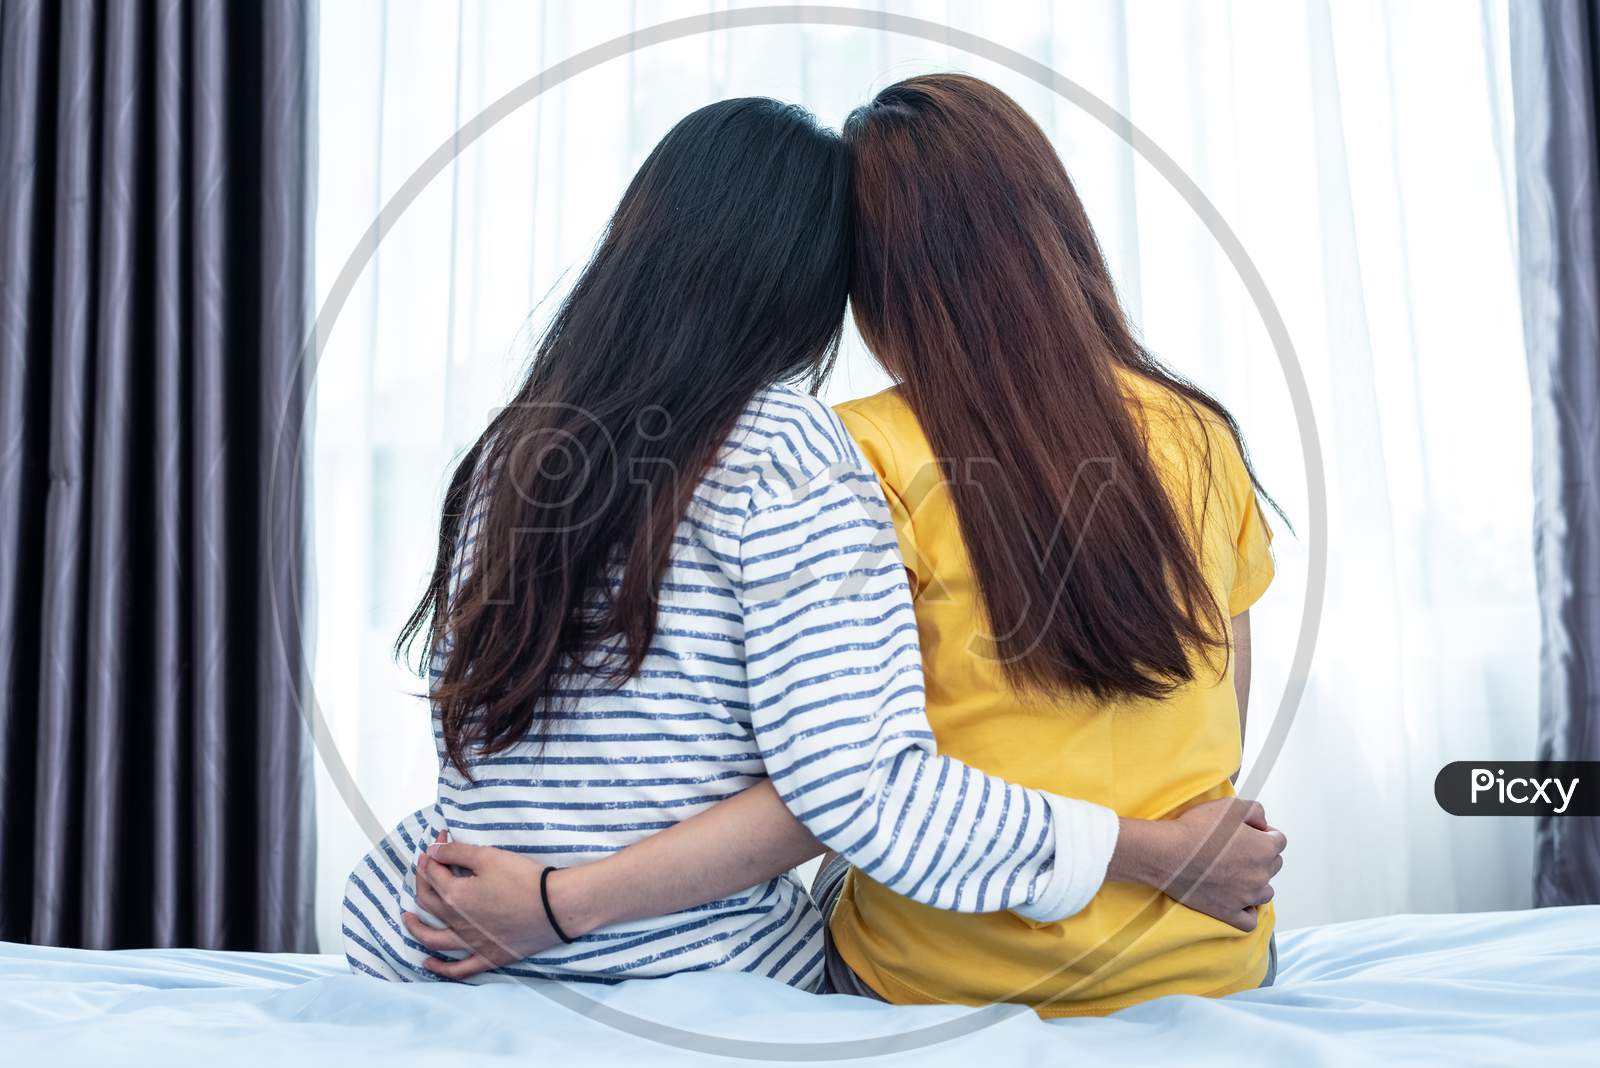 Back View Of Asian Beauty Embracing Together By A Girl Friend. People And Lifestyle Concept. Relationship And Friendship Theme. Lesbian And Lgbt Pride Theme.